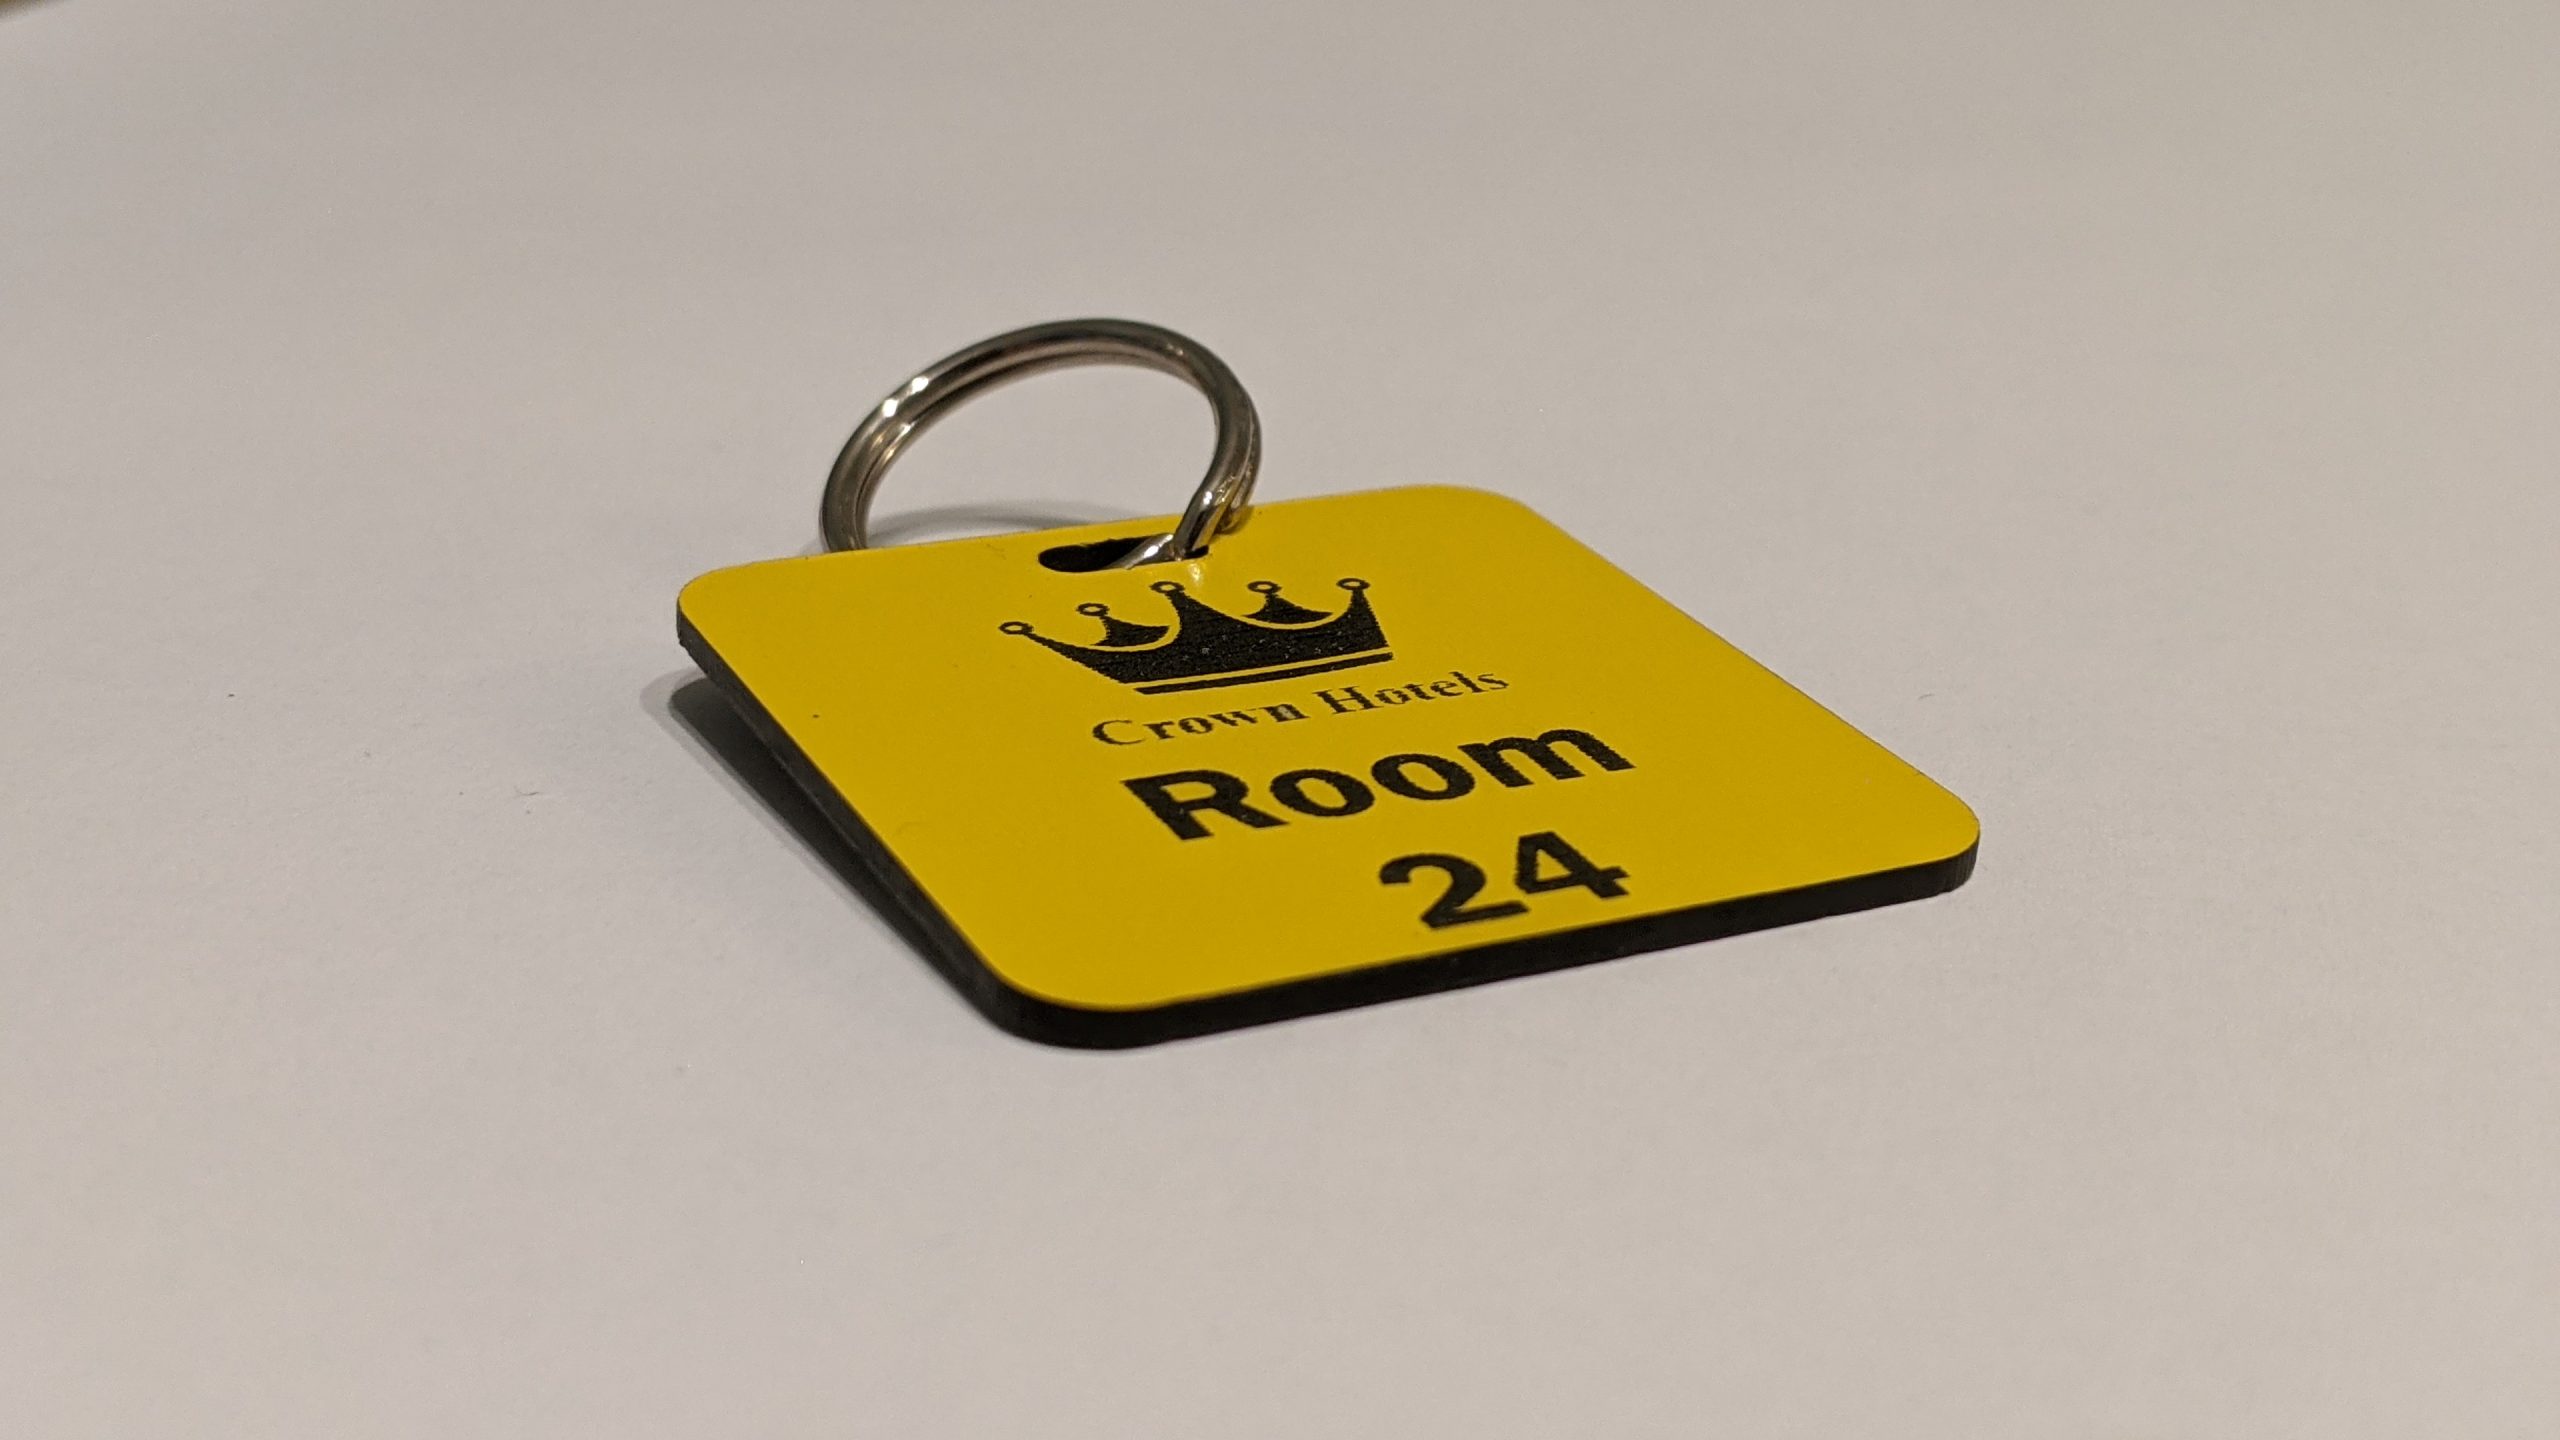 Yellow keyring with black text showing a crown logo and a door number